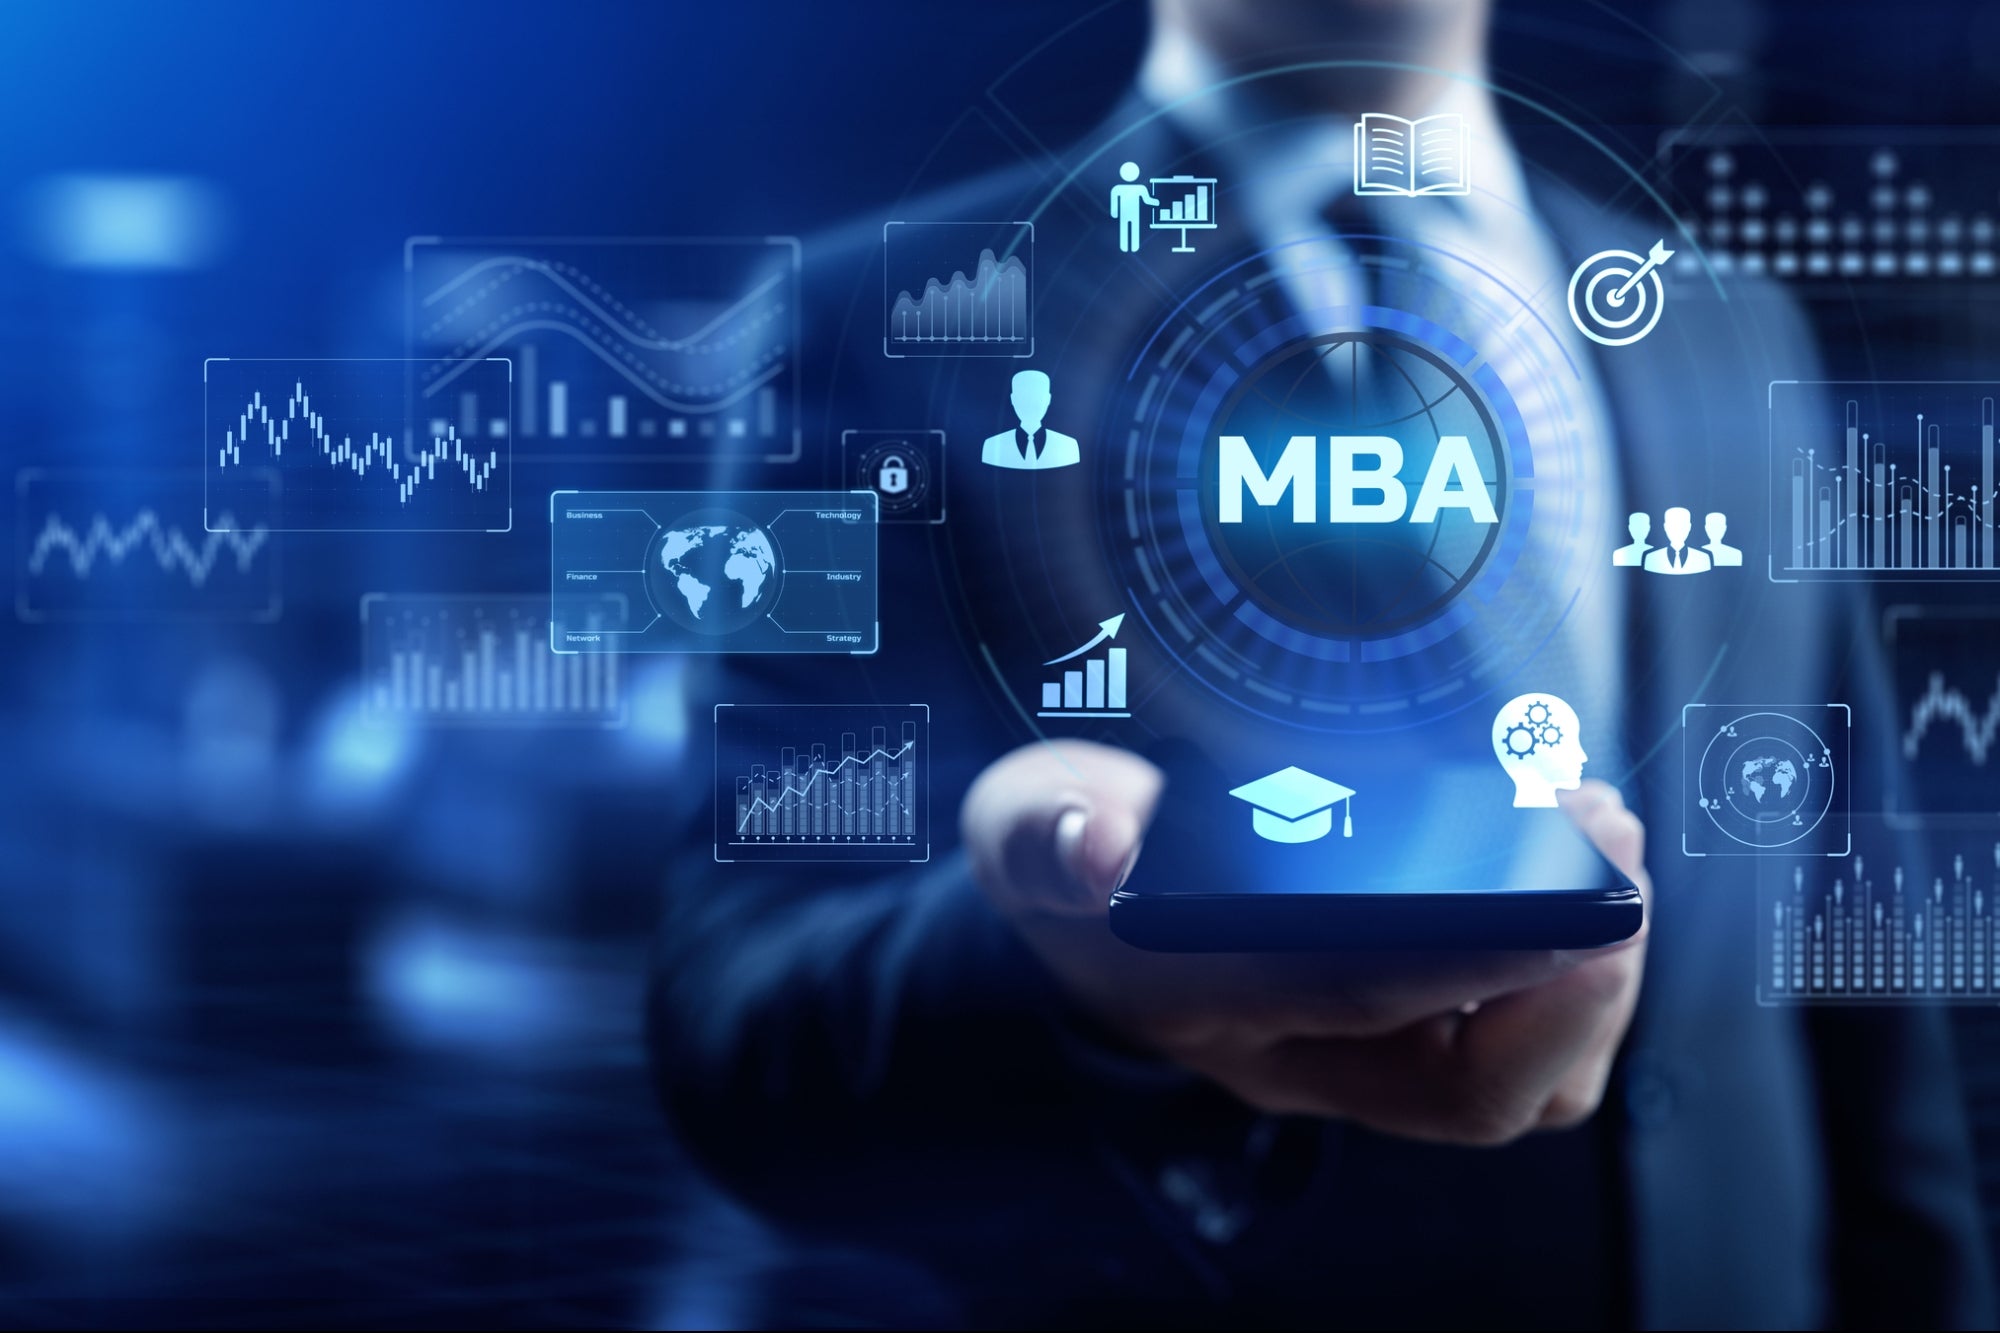 Do You Need an MBA to Succeed in Business?